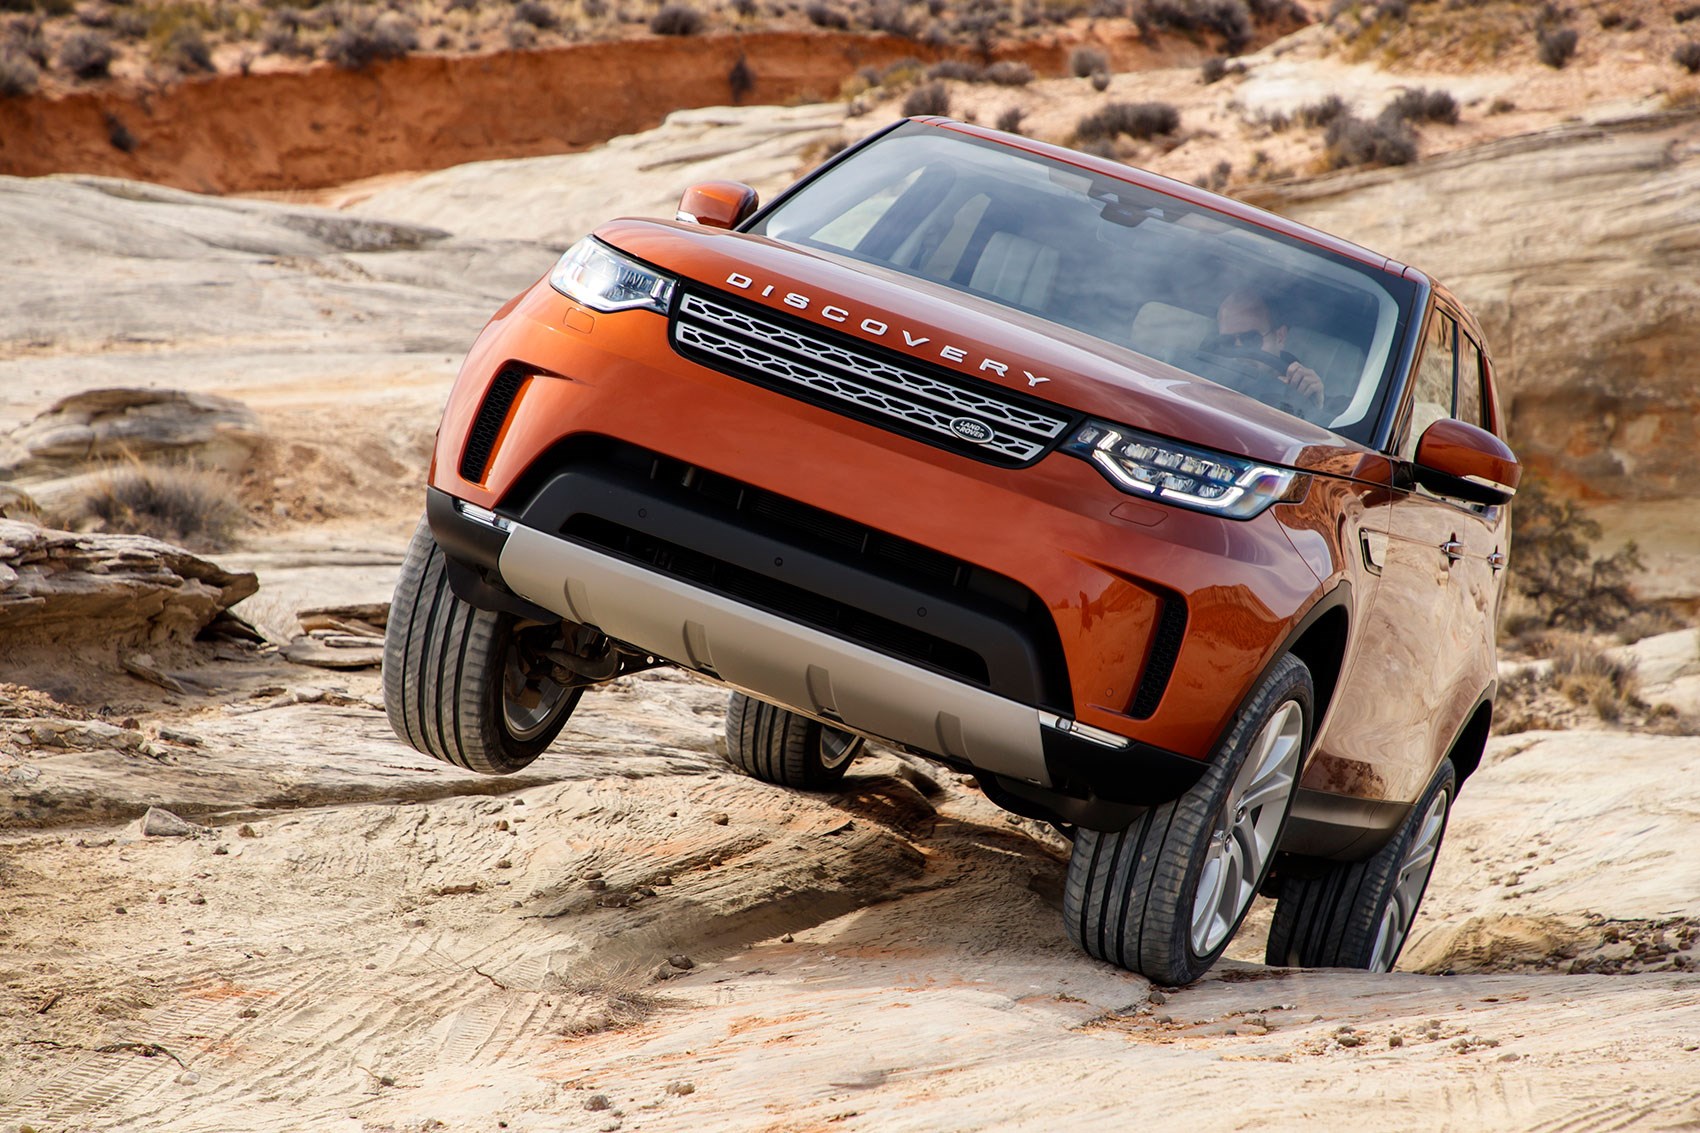 A proper off-road workhorse: we plug mud in the new Land Rover Discovery 5